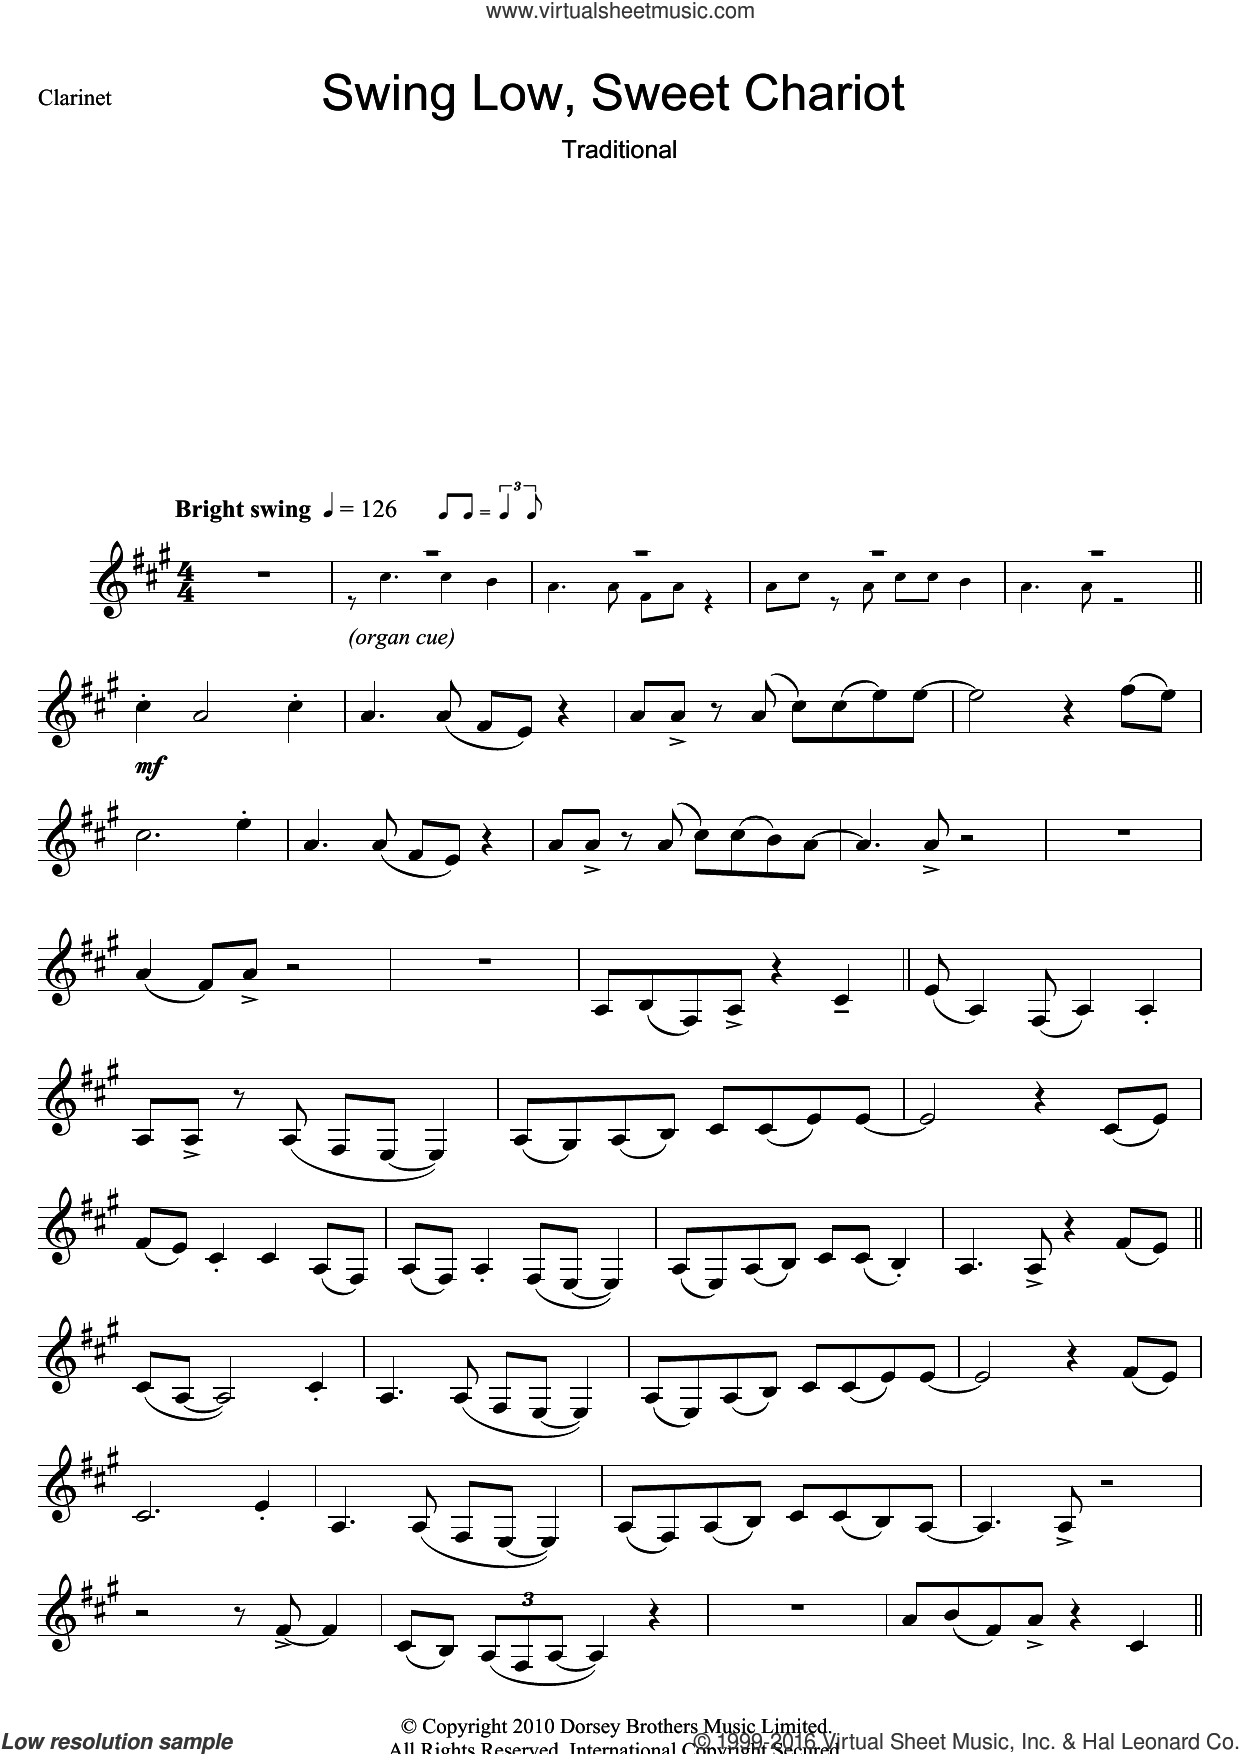 Swing Low, Sweet Chariot sheet music for clarinet solo [PDF]